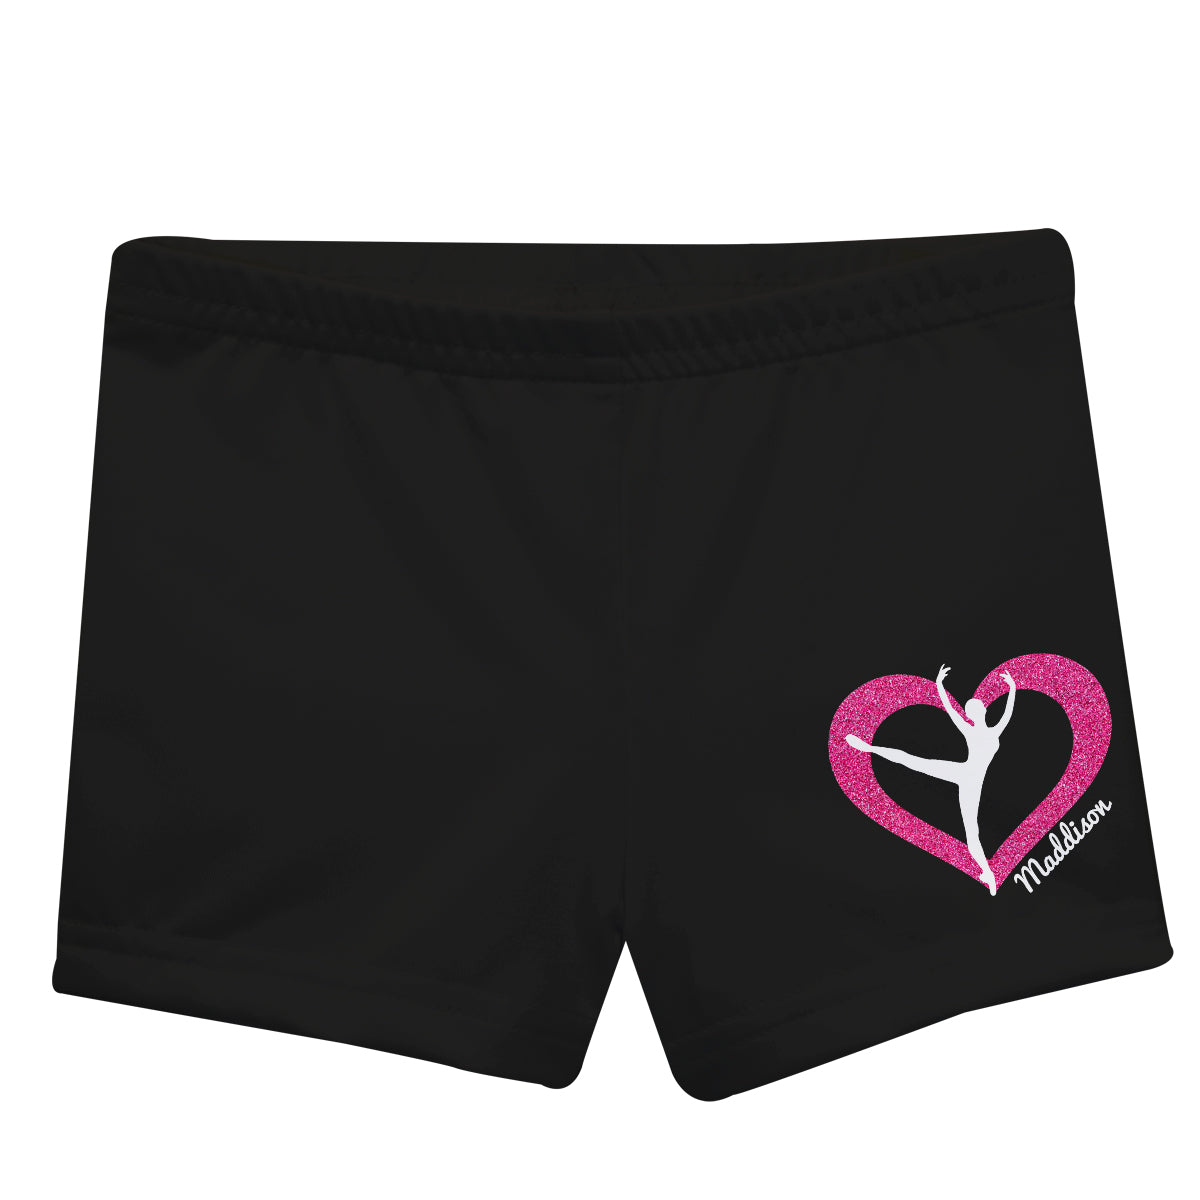 Black and hot pink gymnast short with name - Wimziy&Co.